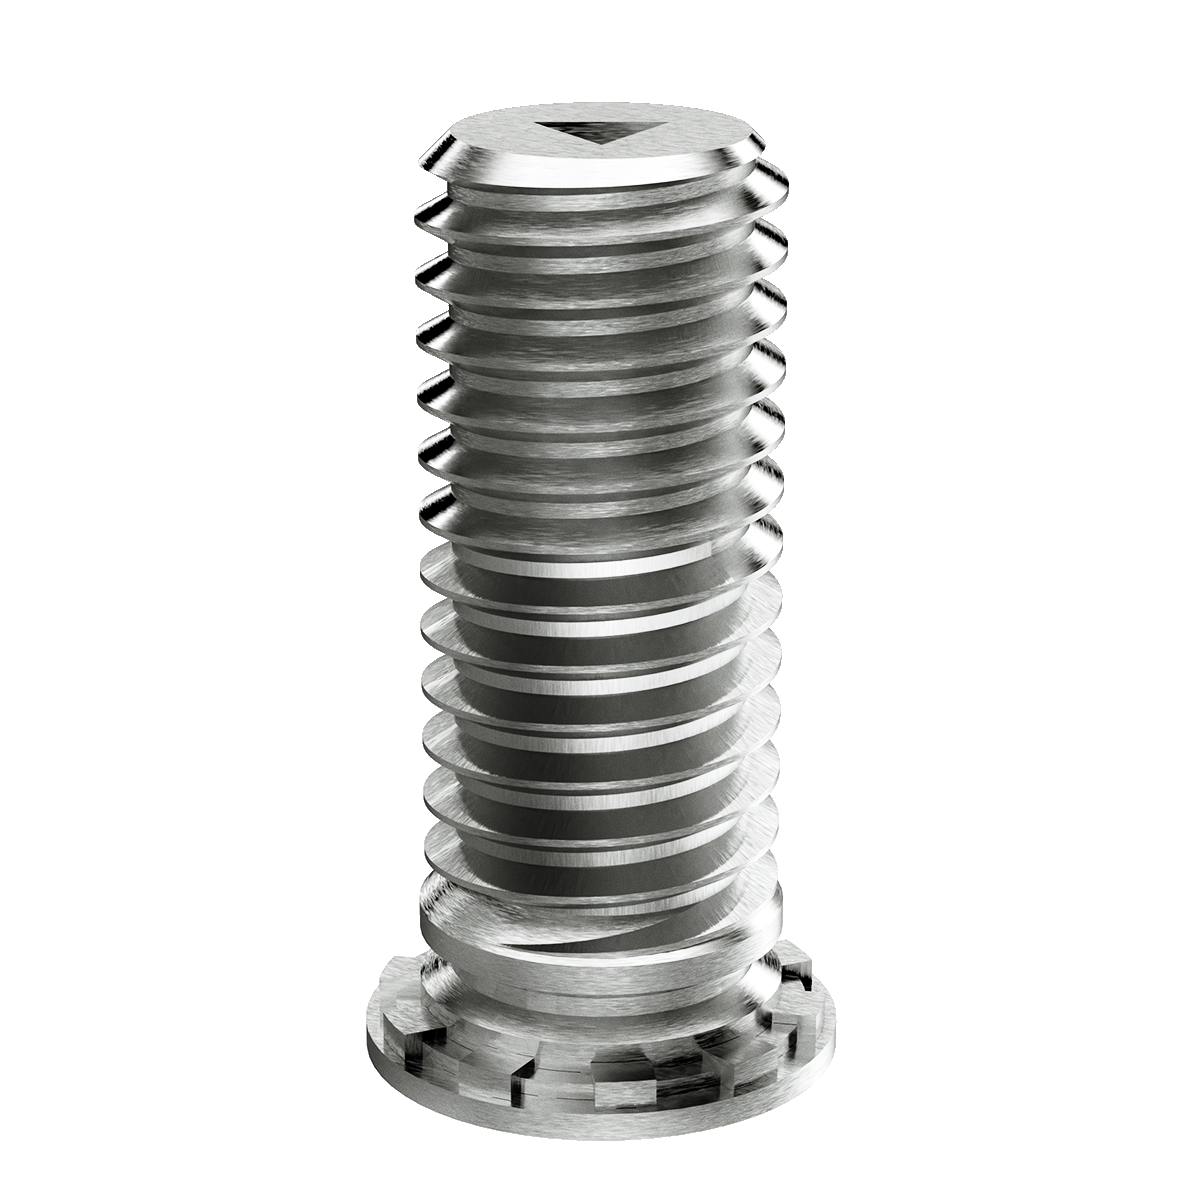 Self-Clinching Stud, For SS, A286 Stainless Steel, Passivated, 1/4-20 x 1.25, 100 Pack